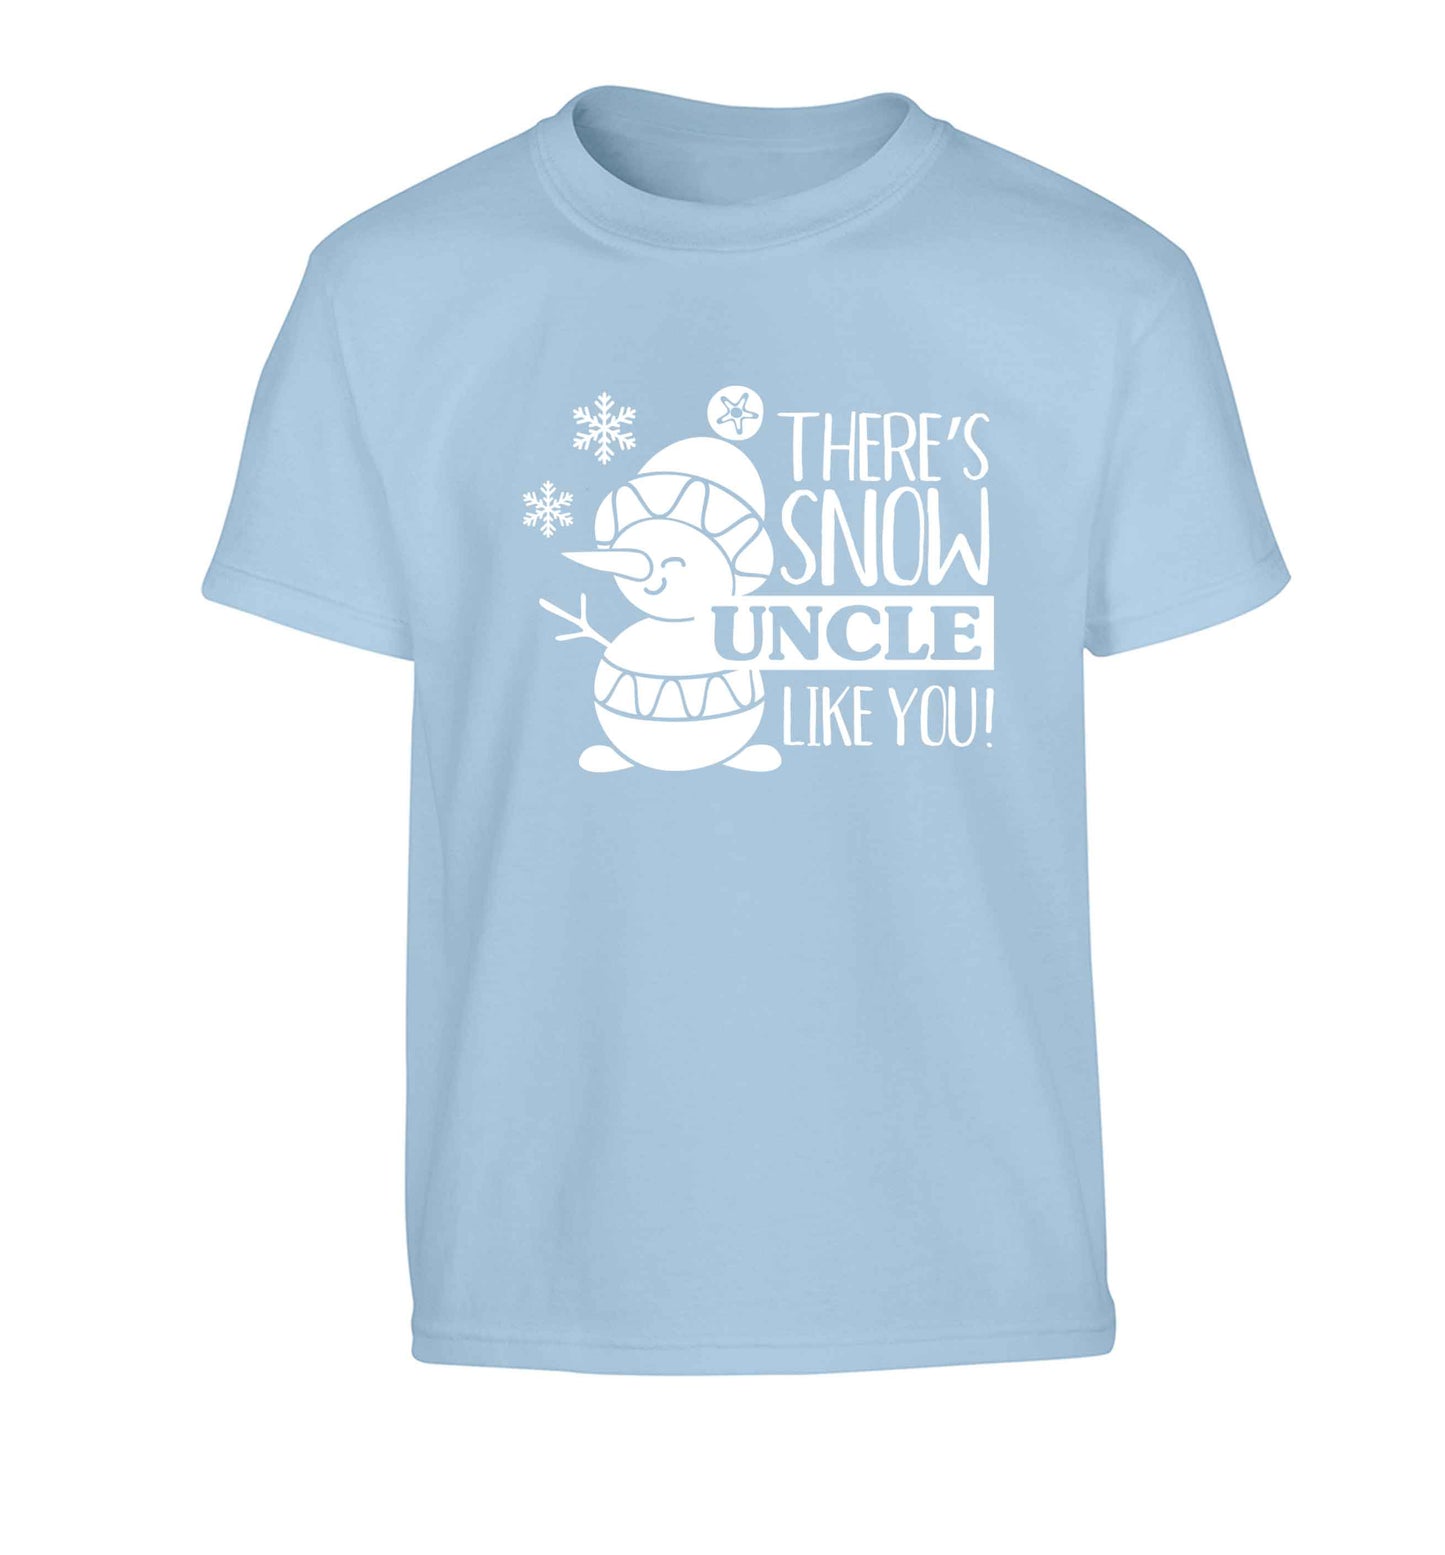 There's snow uncle like you Children's light blue Tshirt 12-13 Years